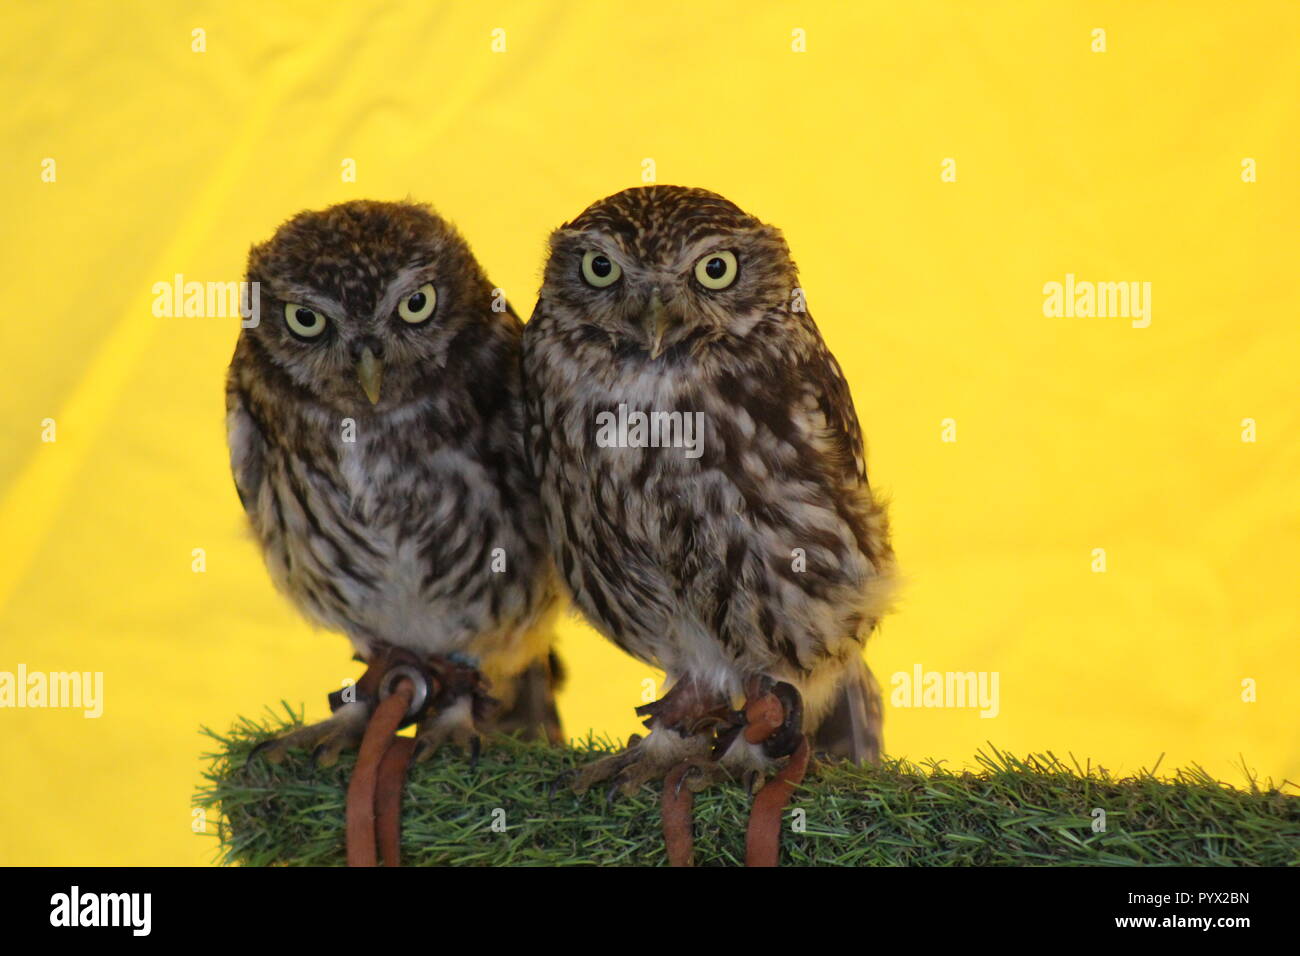 Two owls in a yellow tent Stock Photo